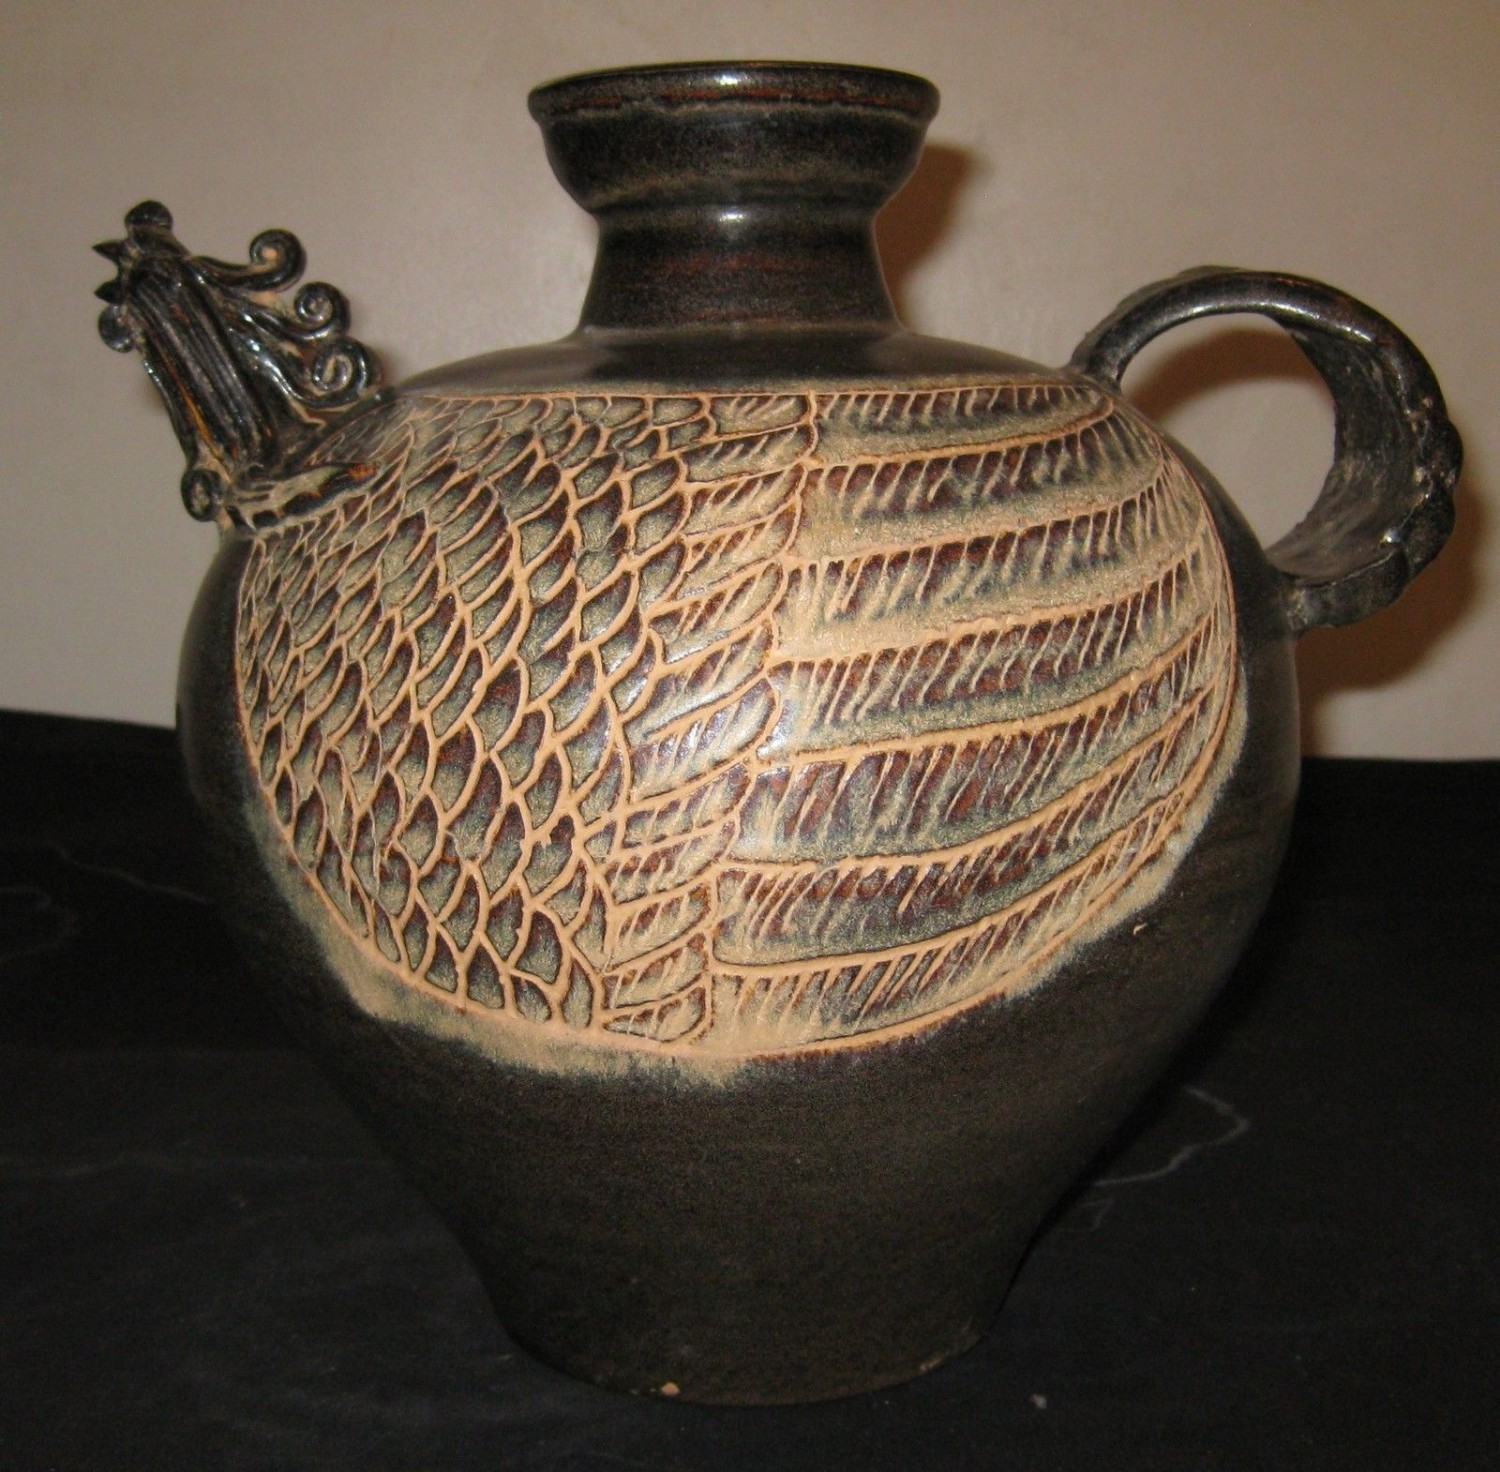 Antique Chinese Southern Song dynasty Pottery Tea Pot, 12th or 13th Century.